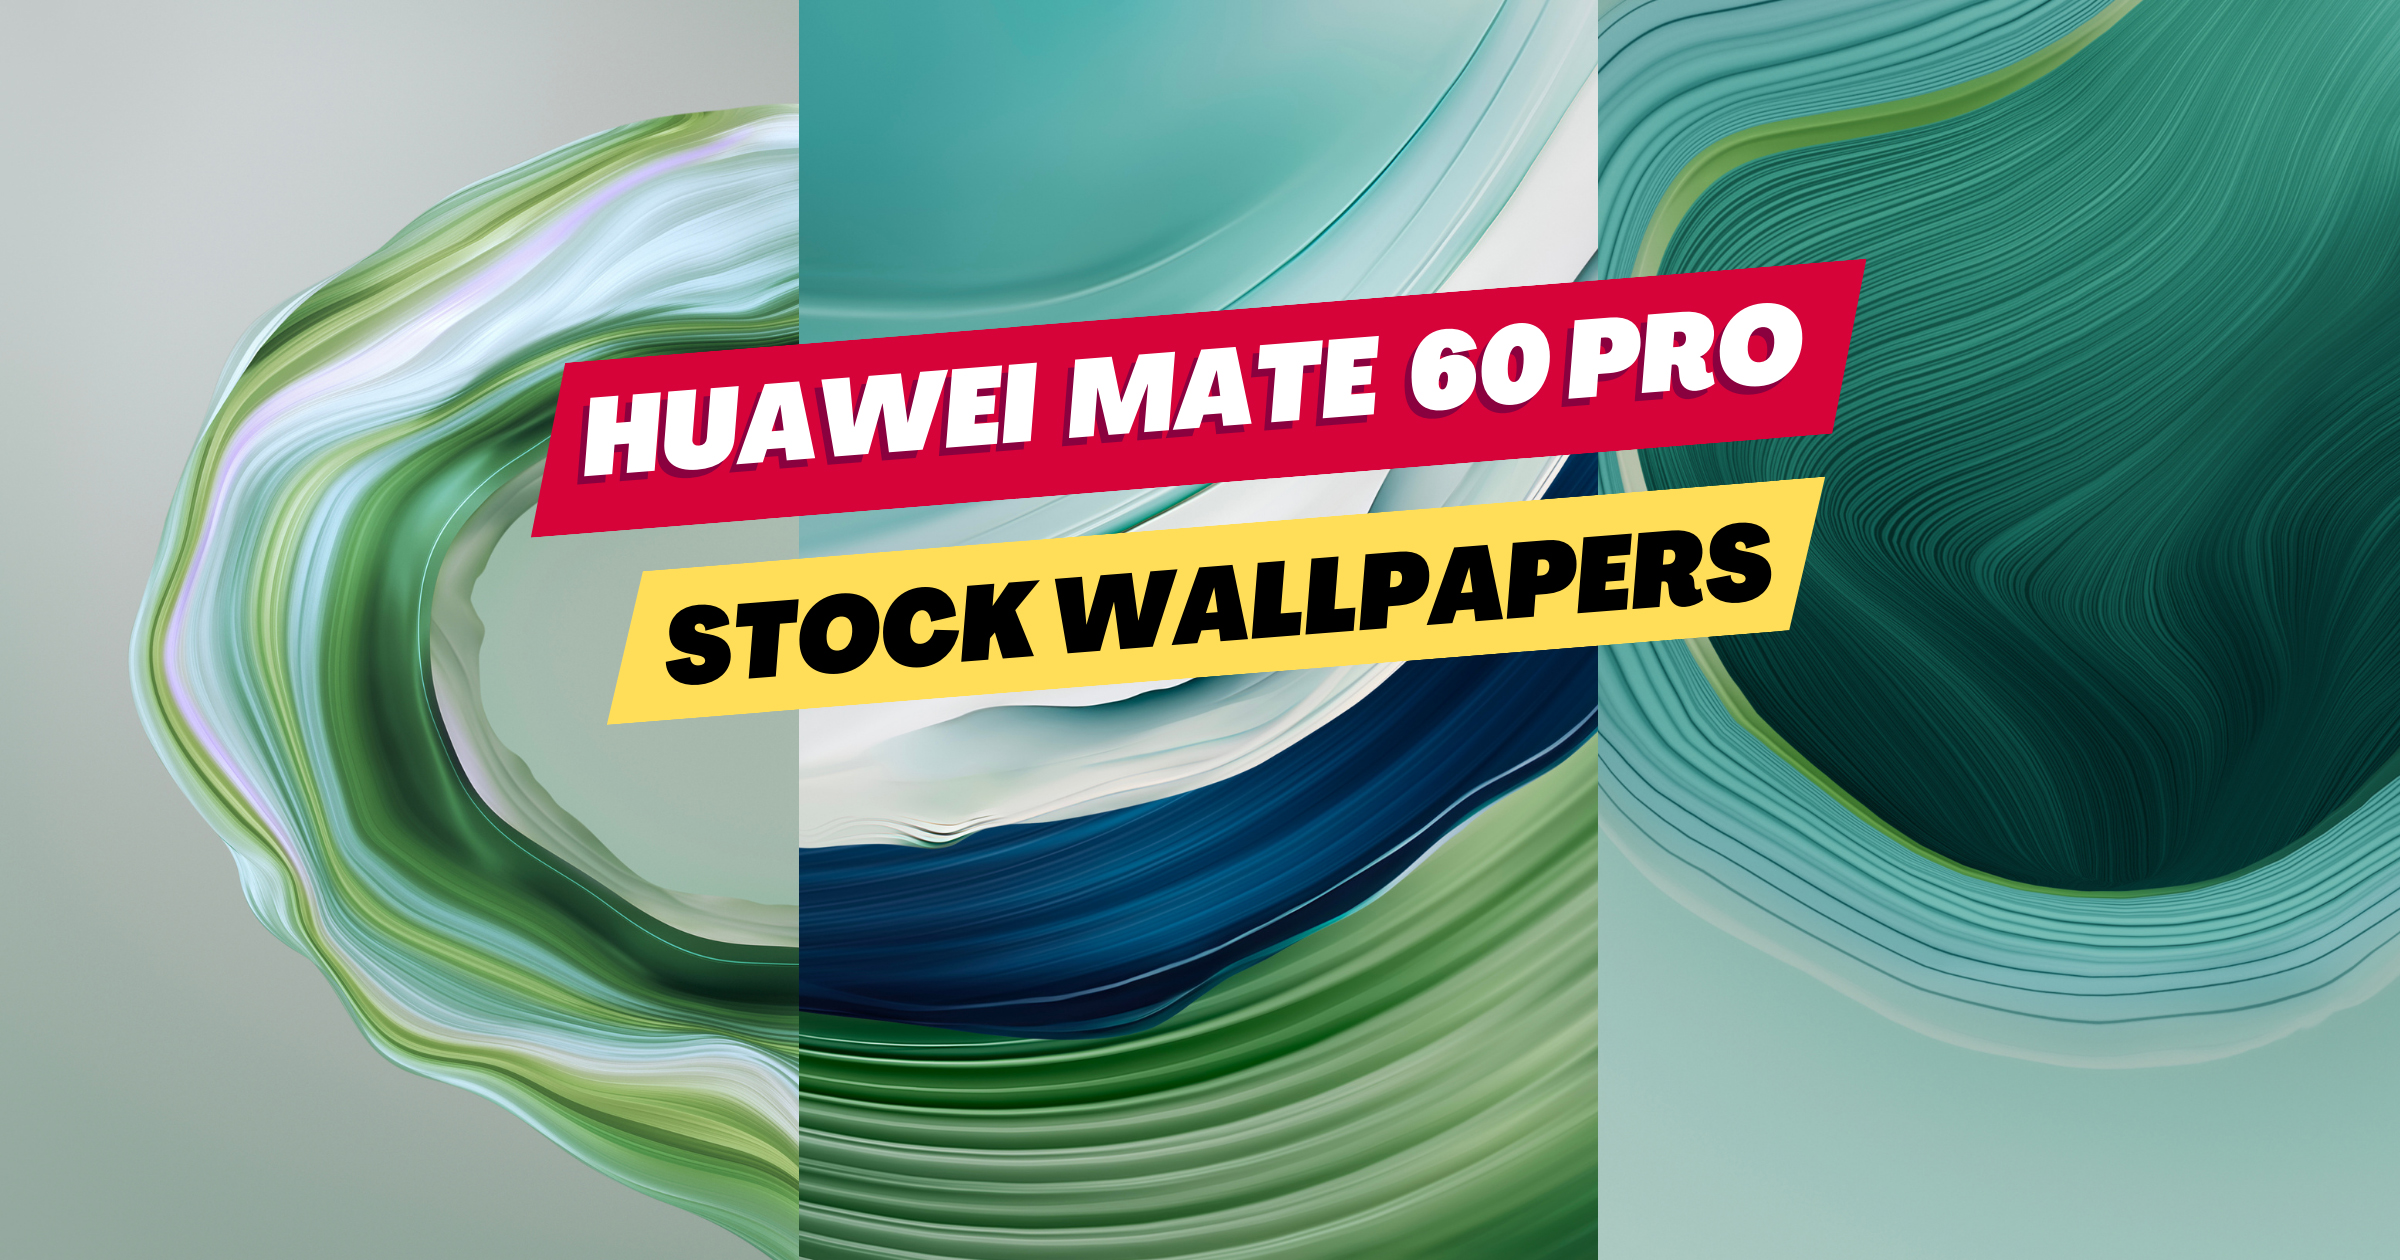 Download Huawei Mate 60 Pro Wallpapers [FHD]